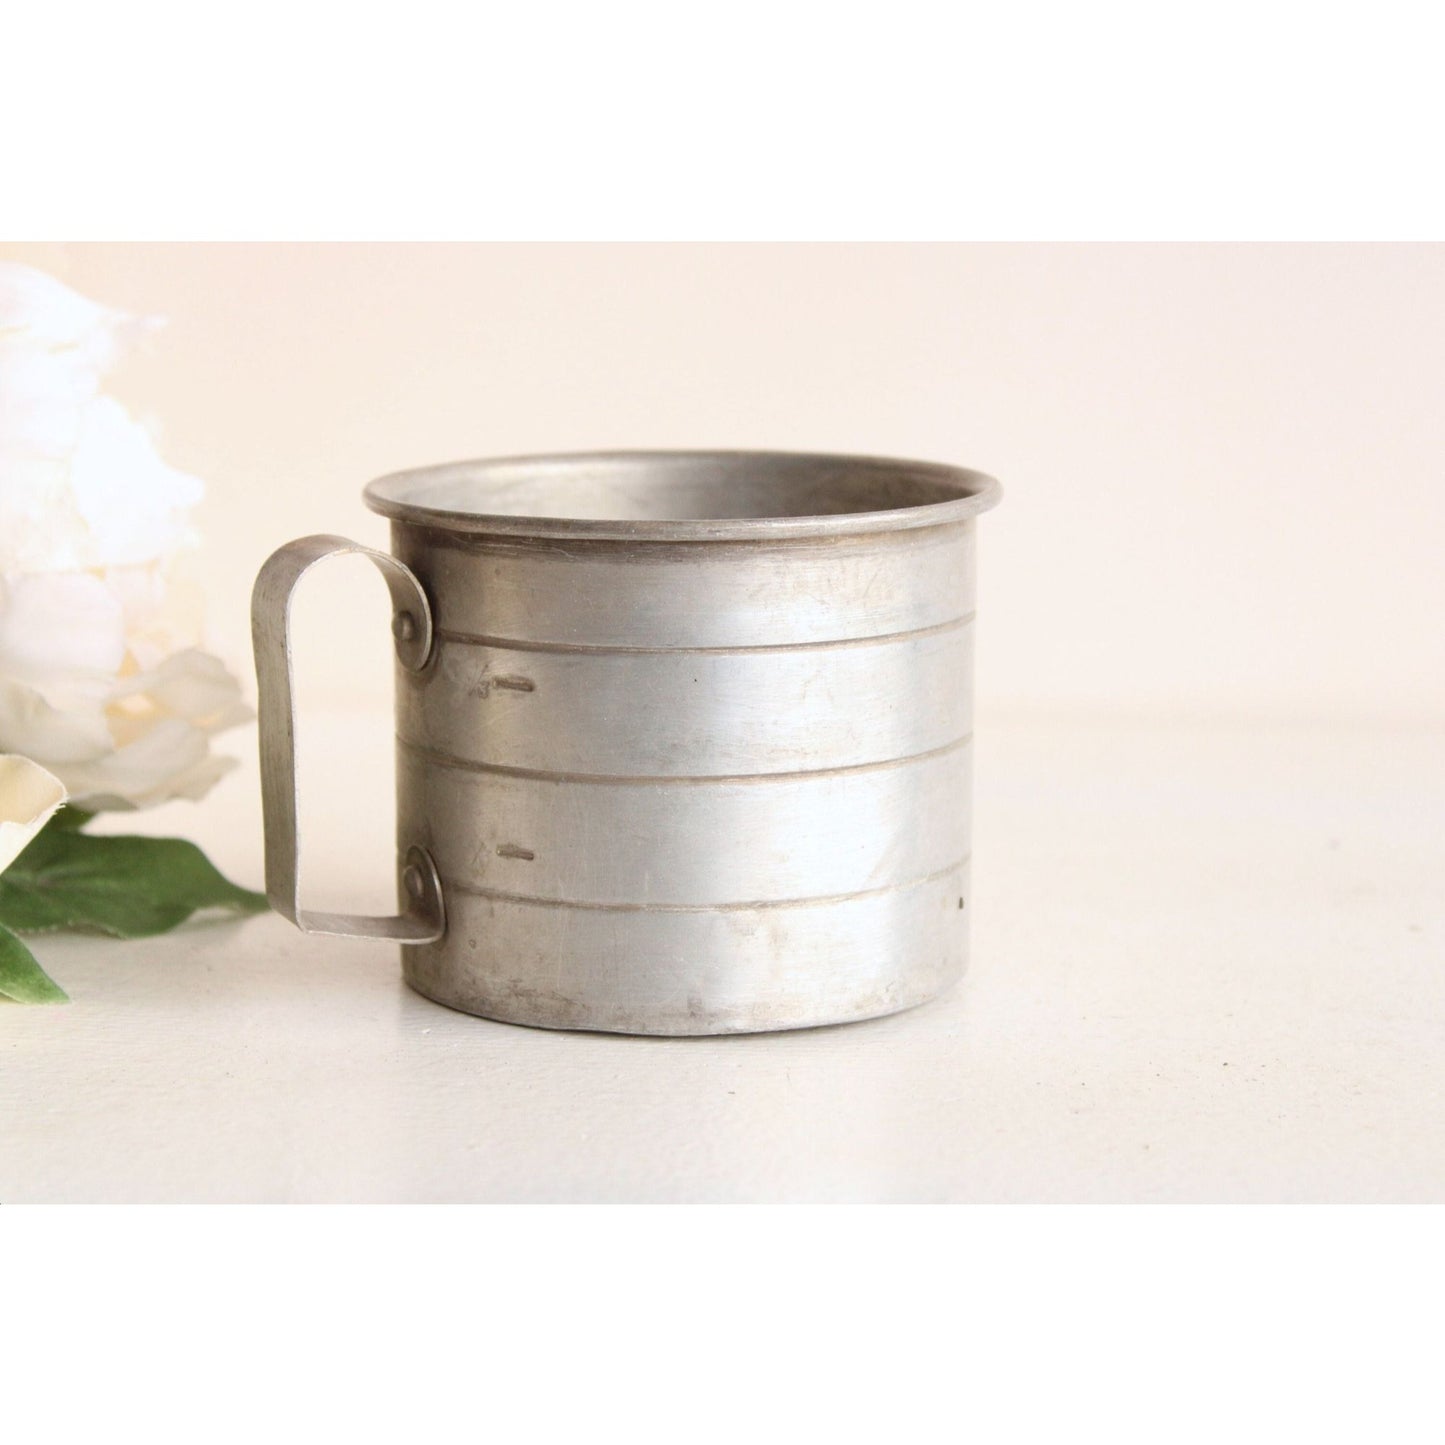 Vintage 1950s Aluminum Two Cup Measuring Cup